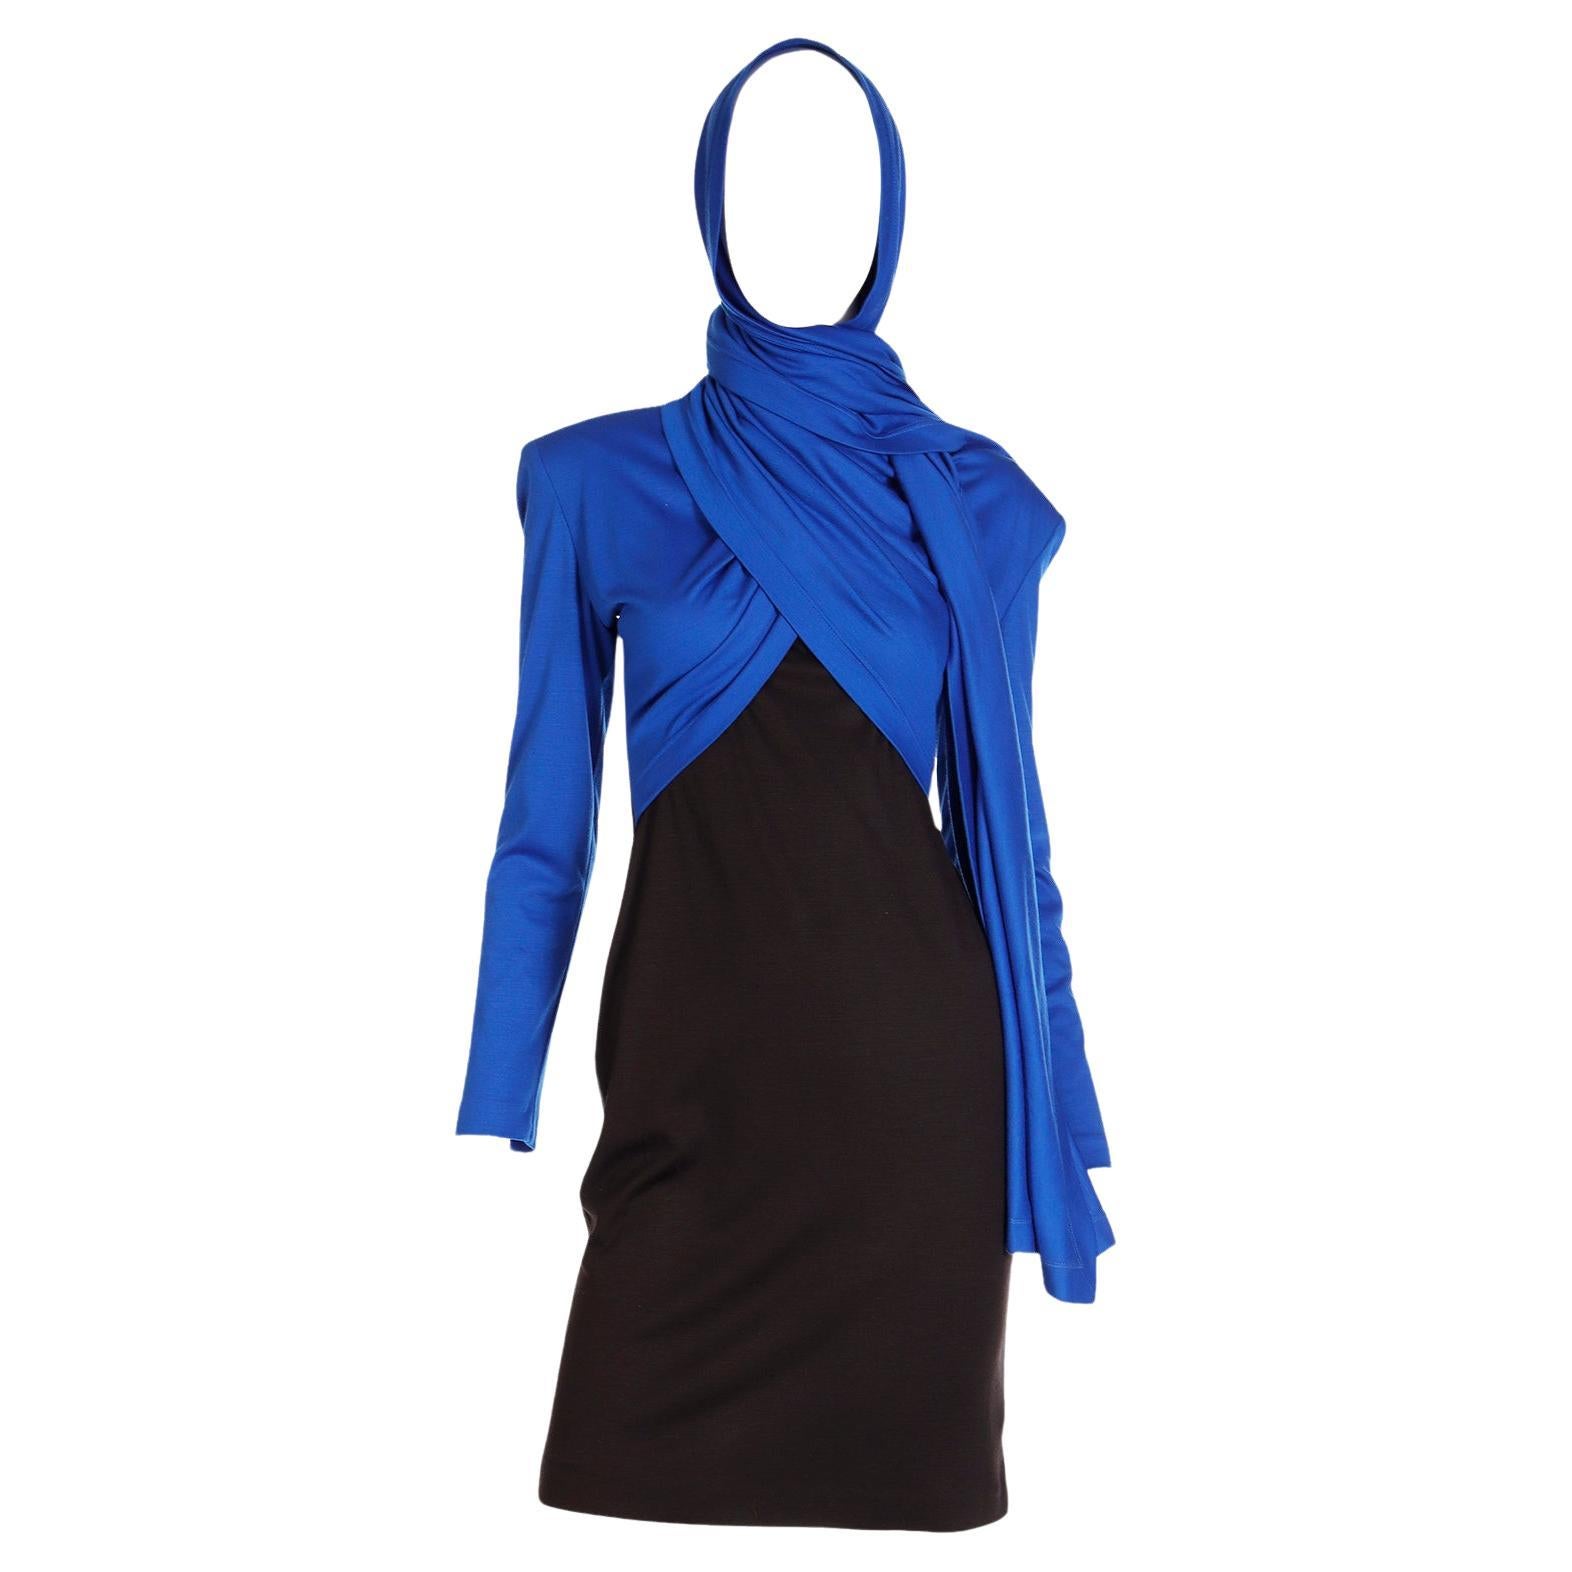 FW 1989 Patrick Kelly Runway Dress in Blue & Black Knit with Head Scarf  For Sale